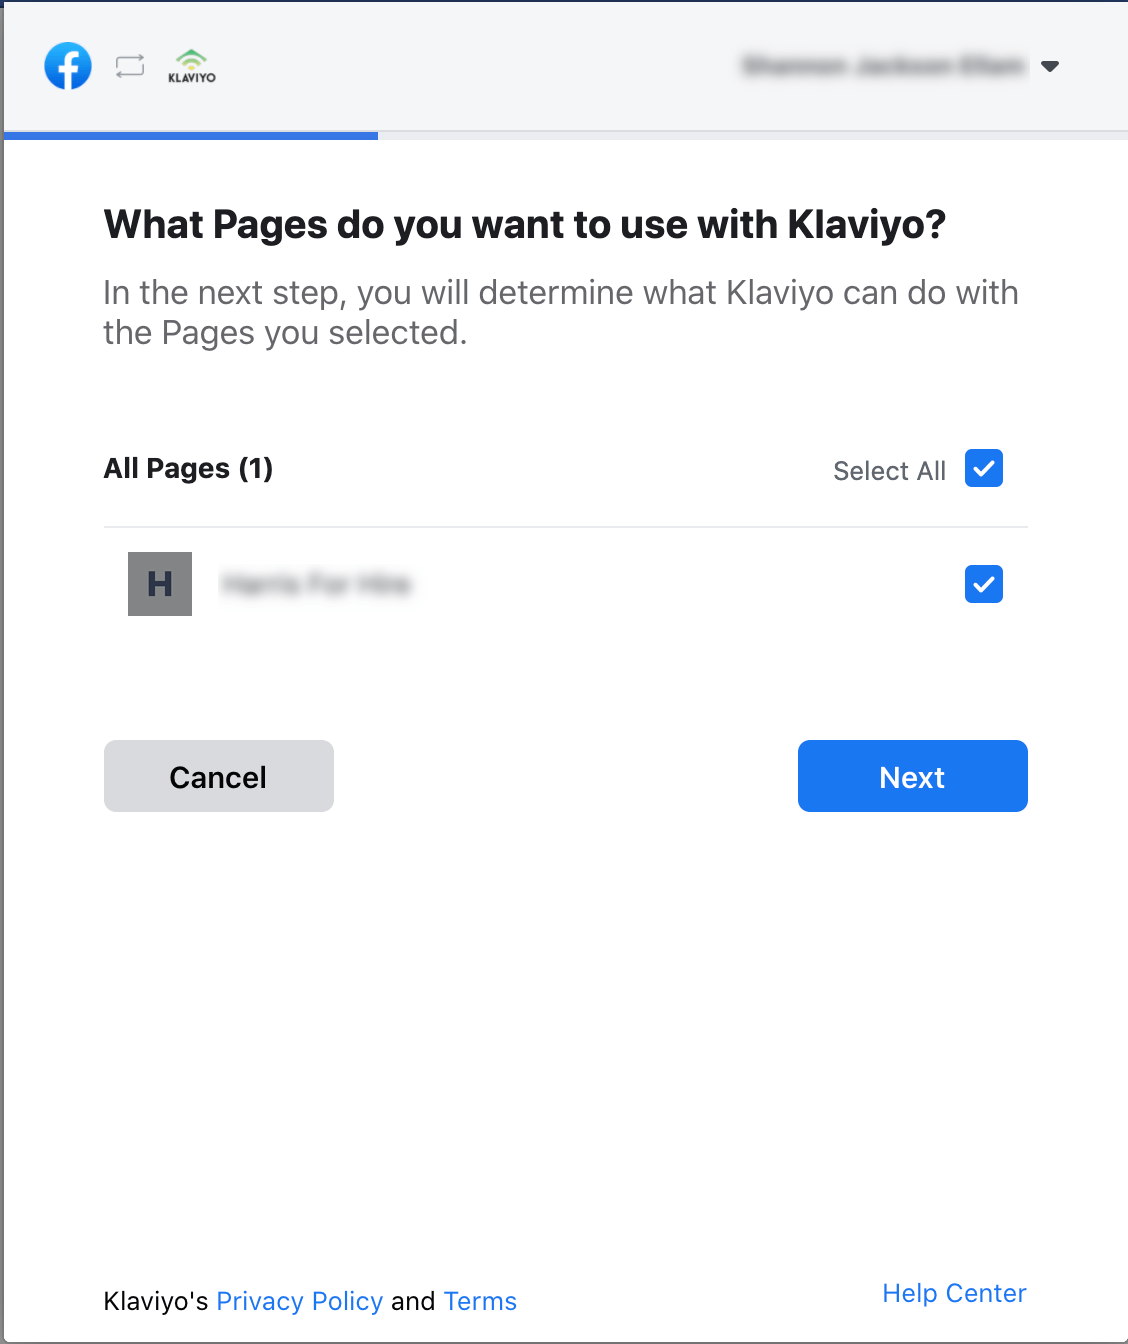 Select Facebook page to integrate with Klaviyo platform by selecting the checkbox on the right side, then clicking Next in bottom right